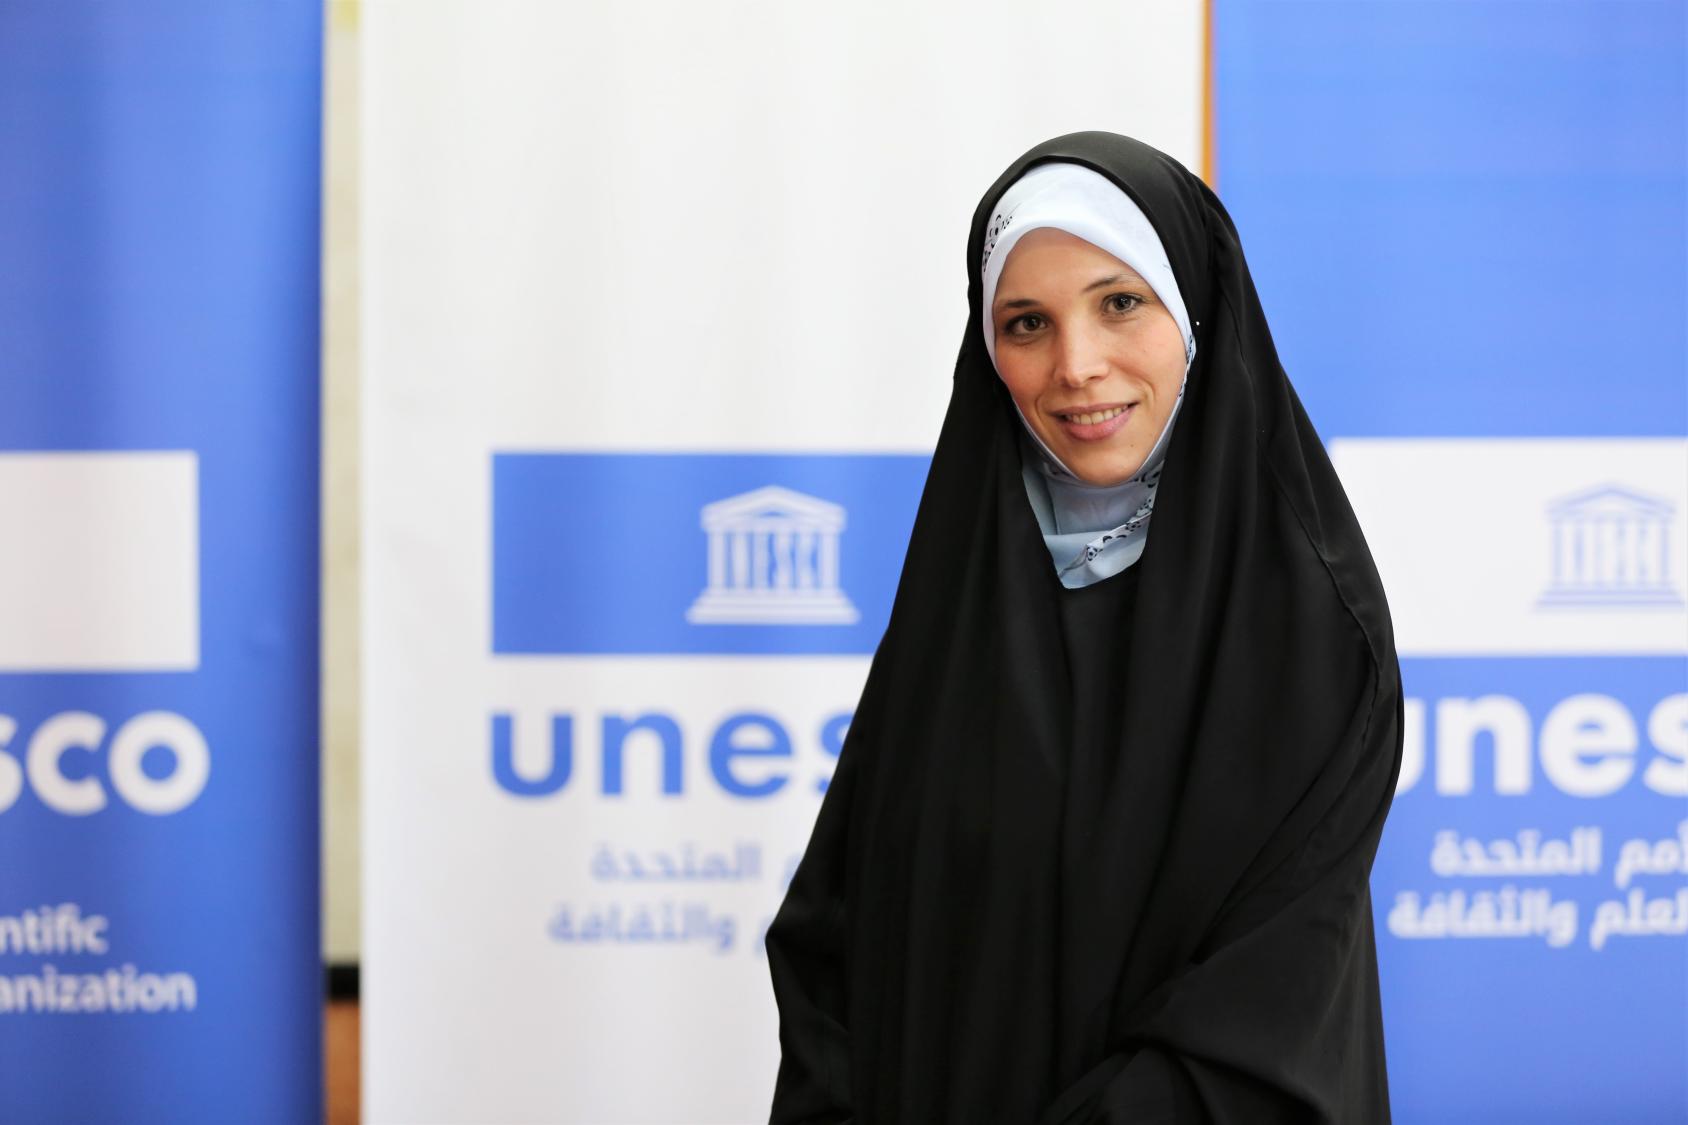 A young woman wearing a long black veil covering her body and head stands smiling before the camera. In the background there are large blue and white posters on which one can read "UNESCO" under the logo of the Organization.